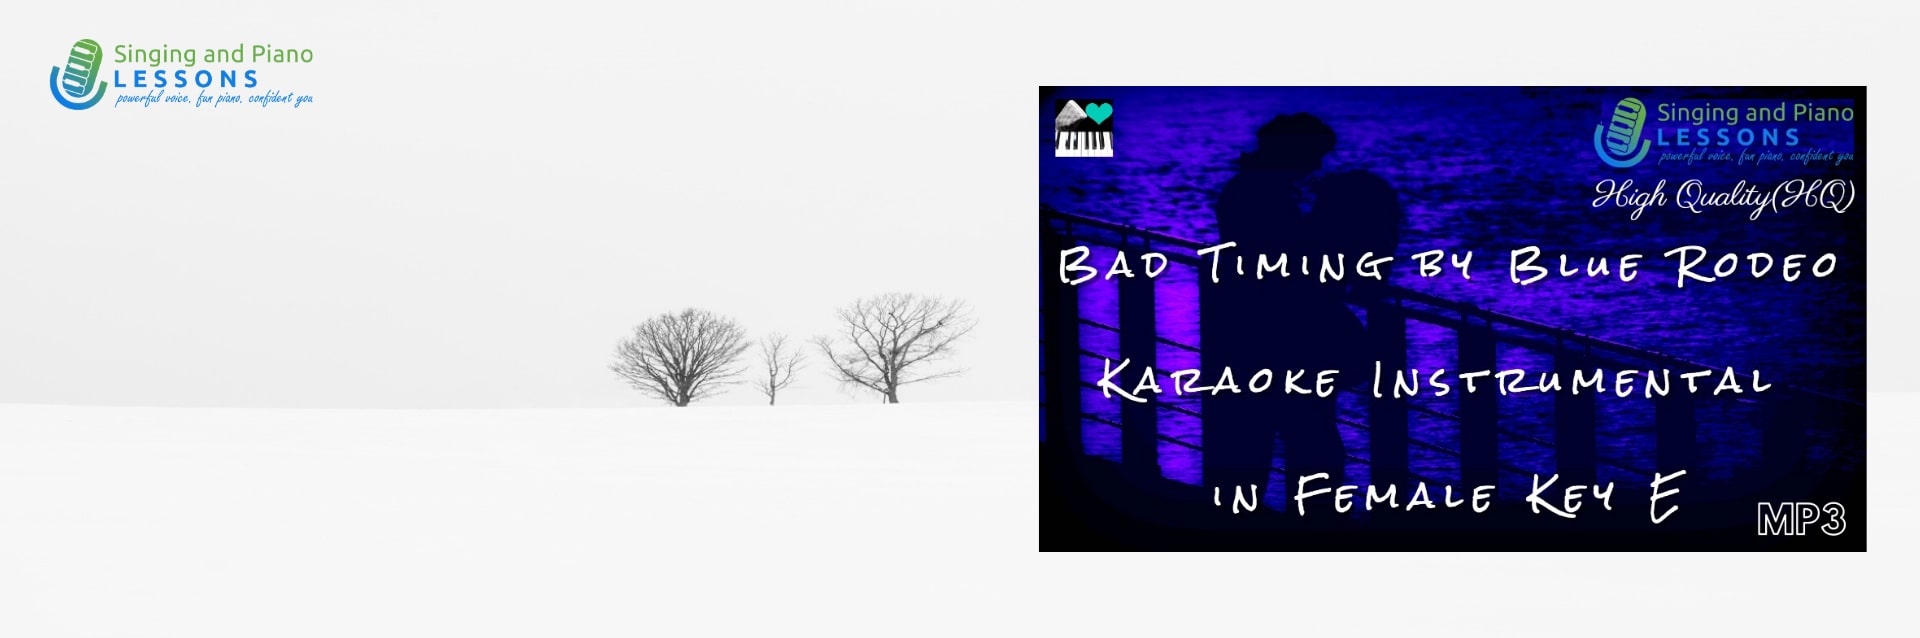 Bad Timing by Blue Rodeo Karaoke Instrumental in Female Key E/ Baritone for Males